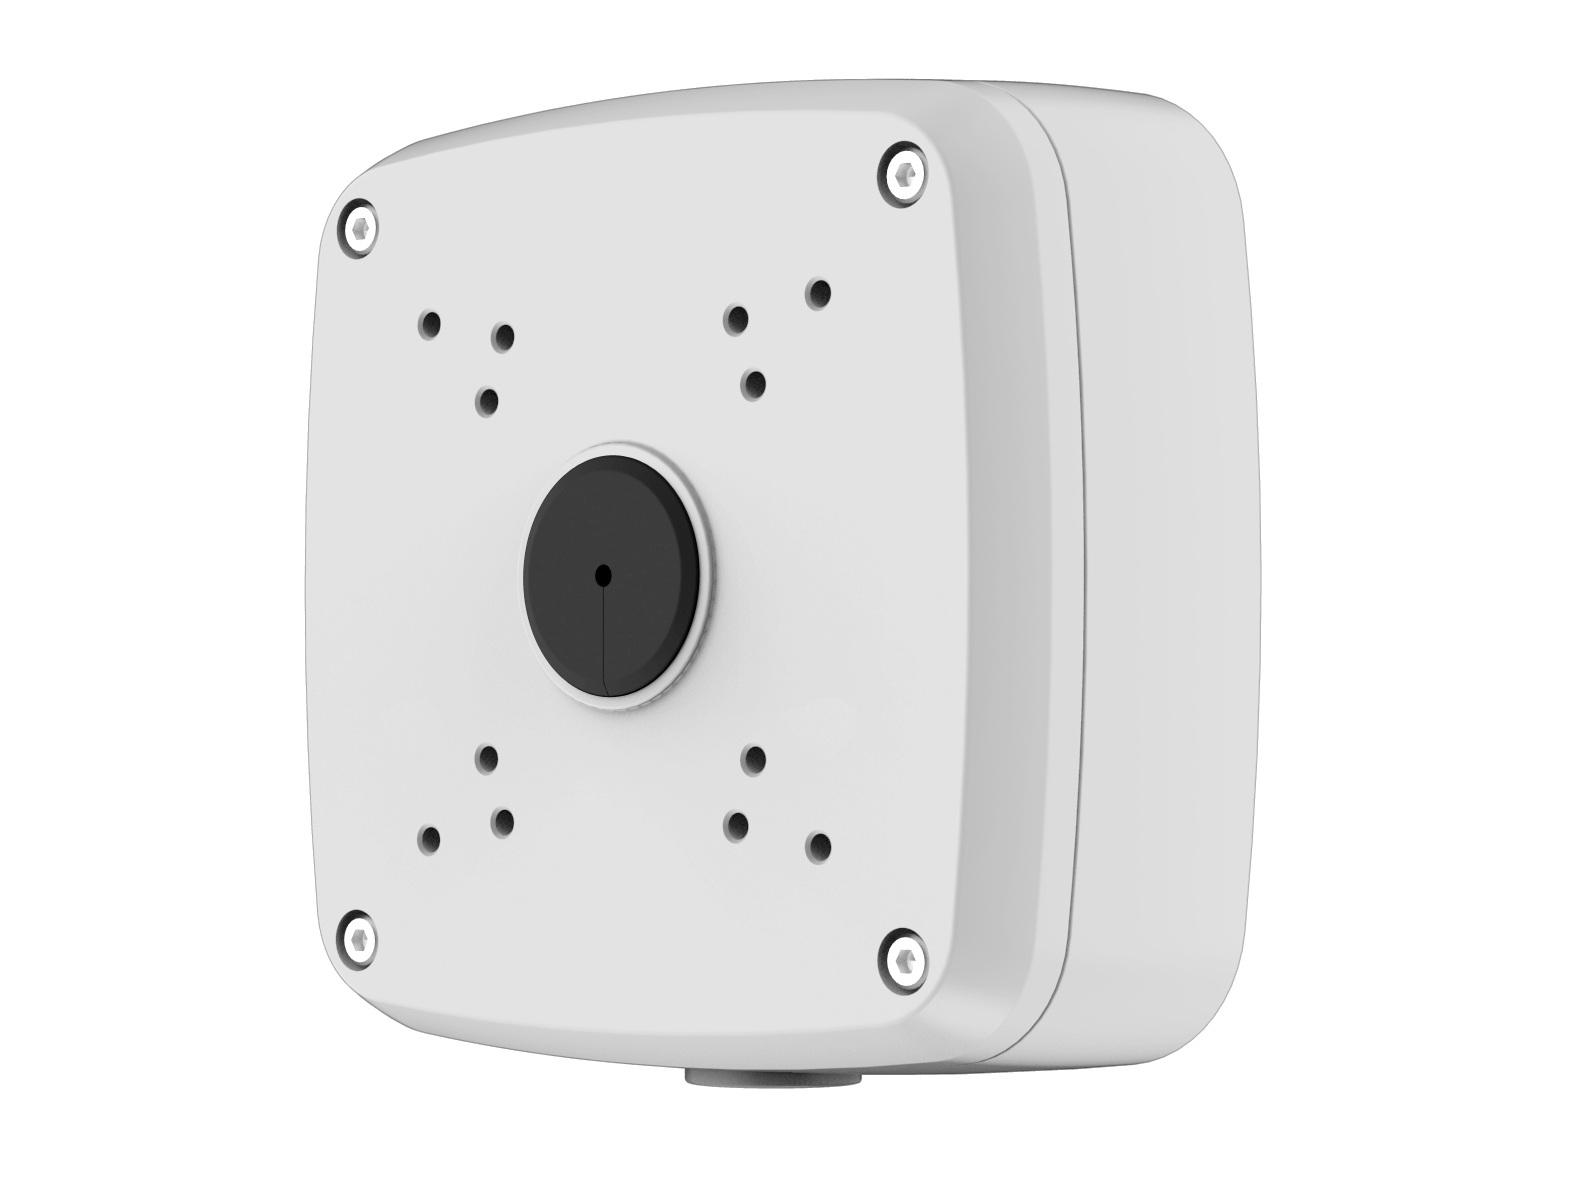 MNT-JUNCTION BOX 4 Square Junction Box For Ip Base Bullet Cameras by ICRealtime